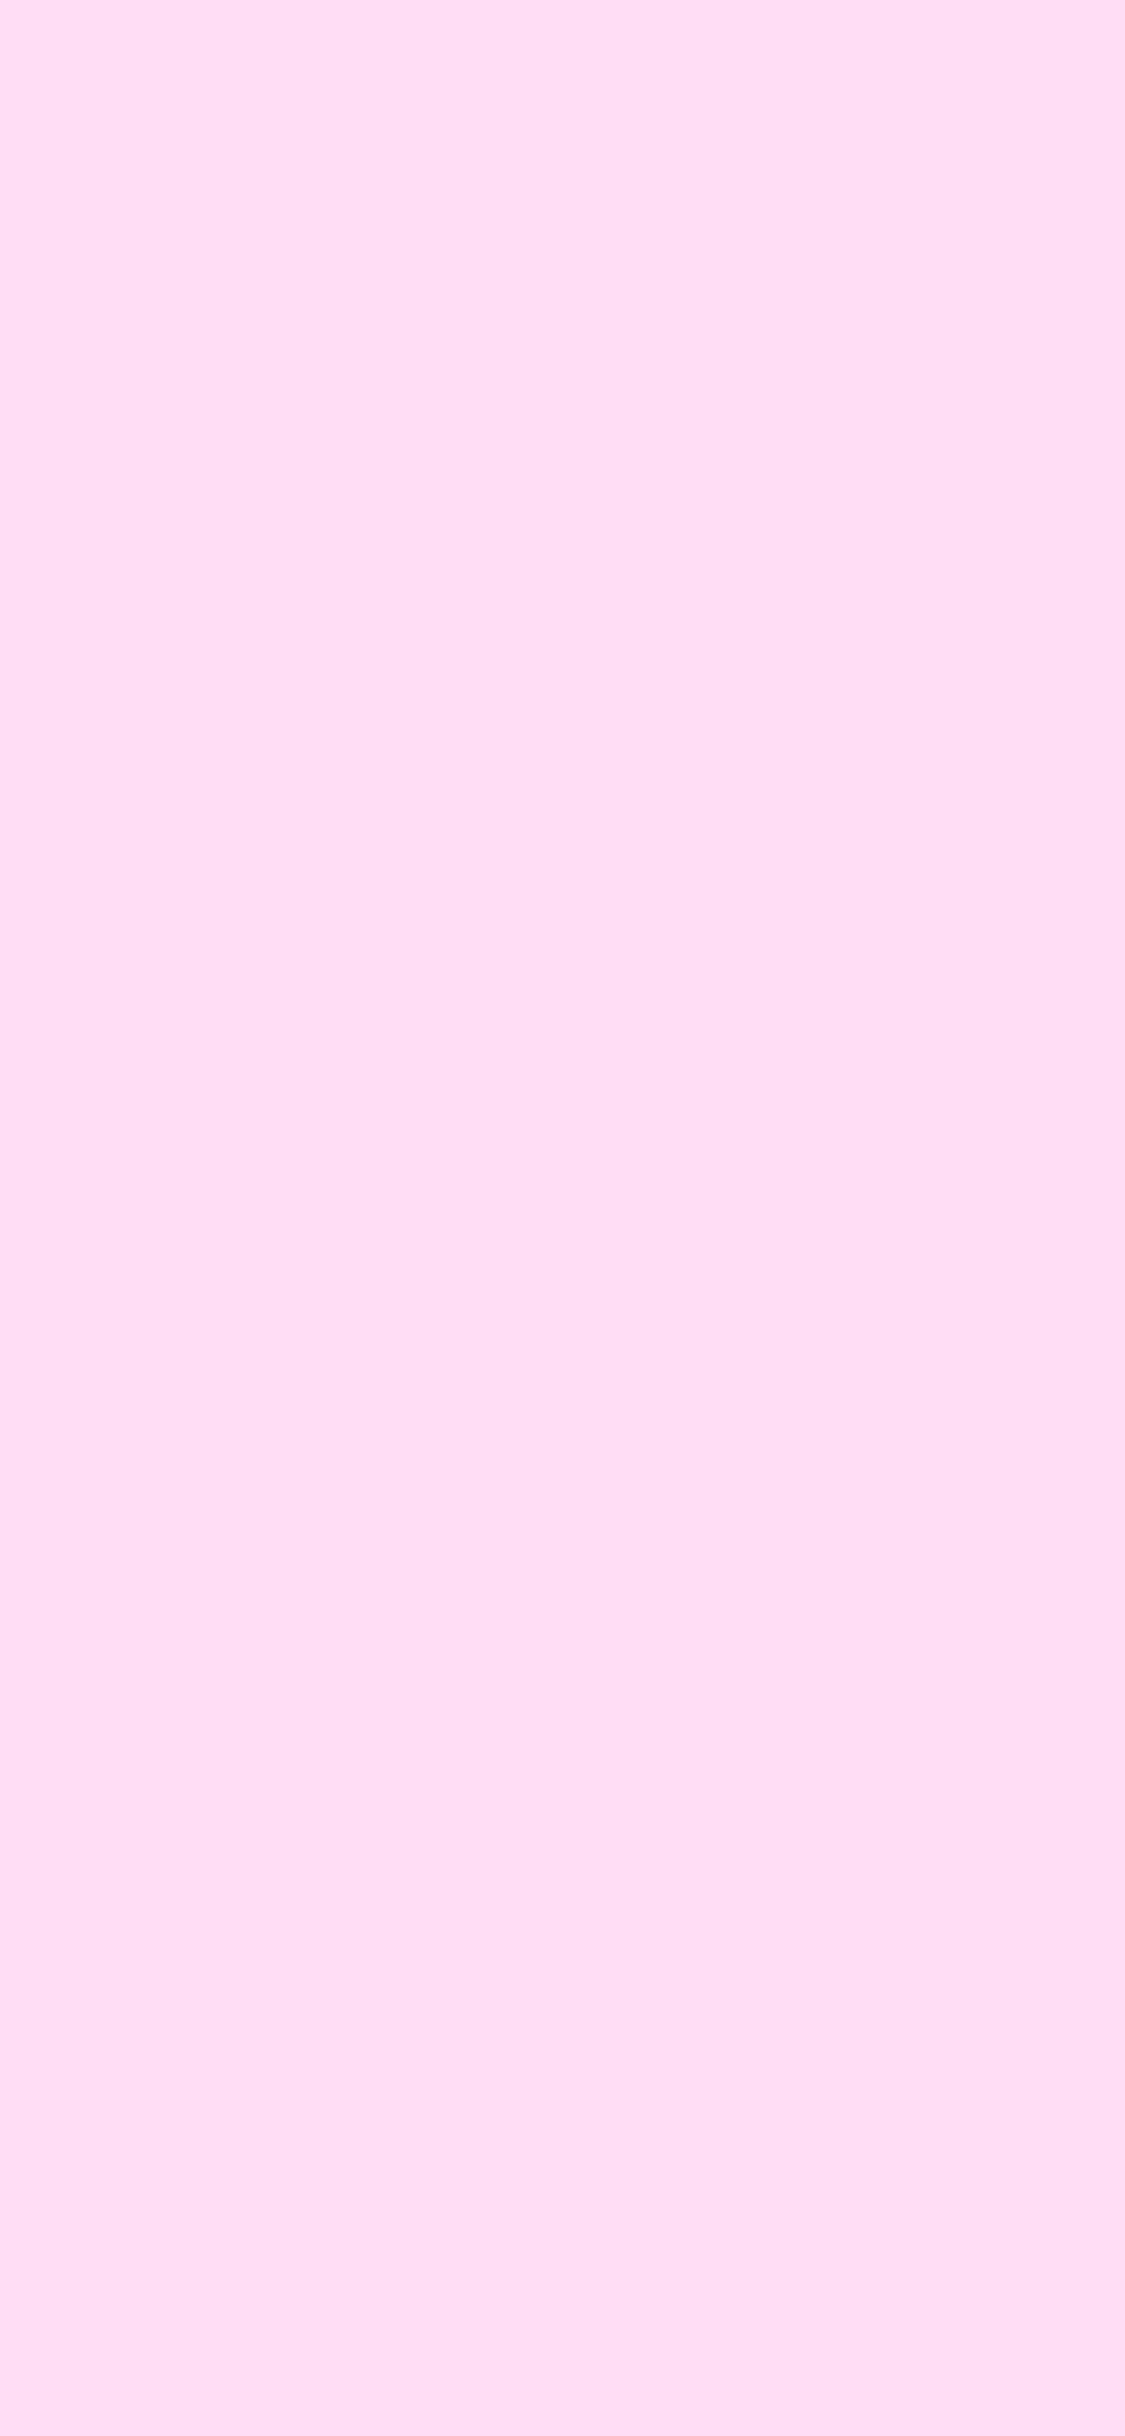 1125x2436 Pink Lace Solid Color Background